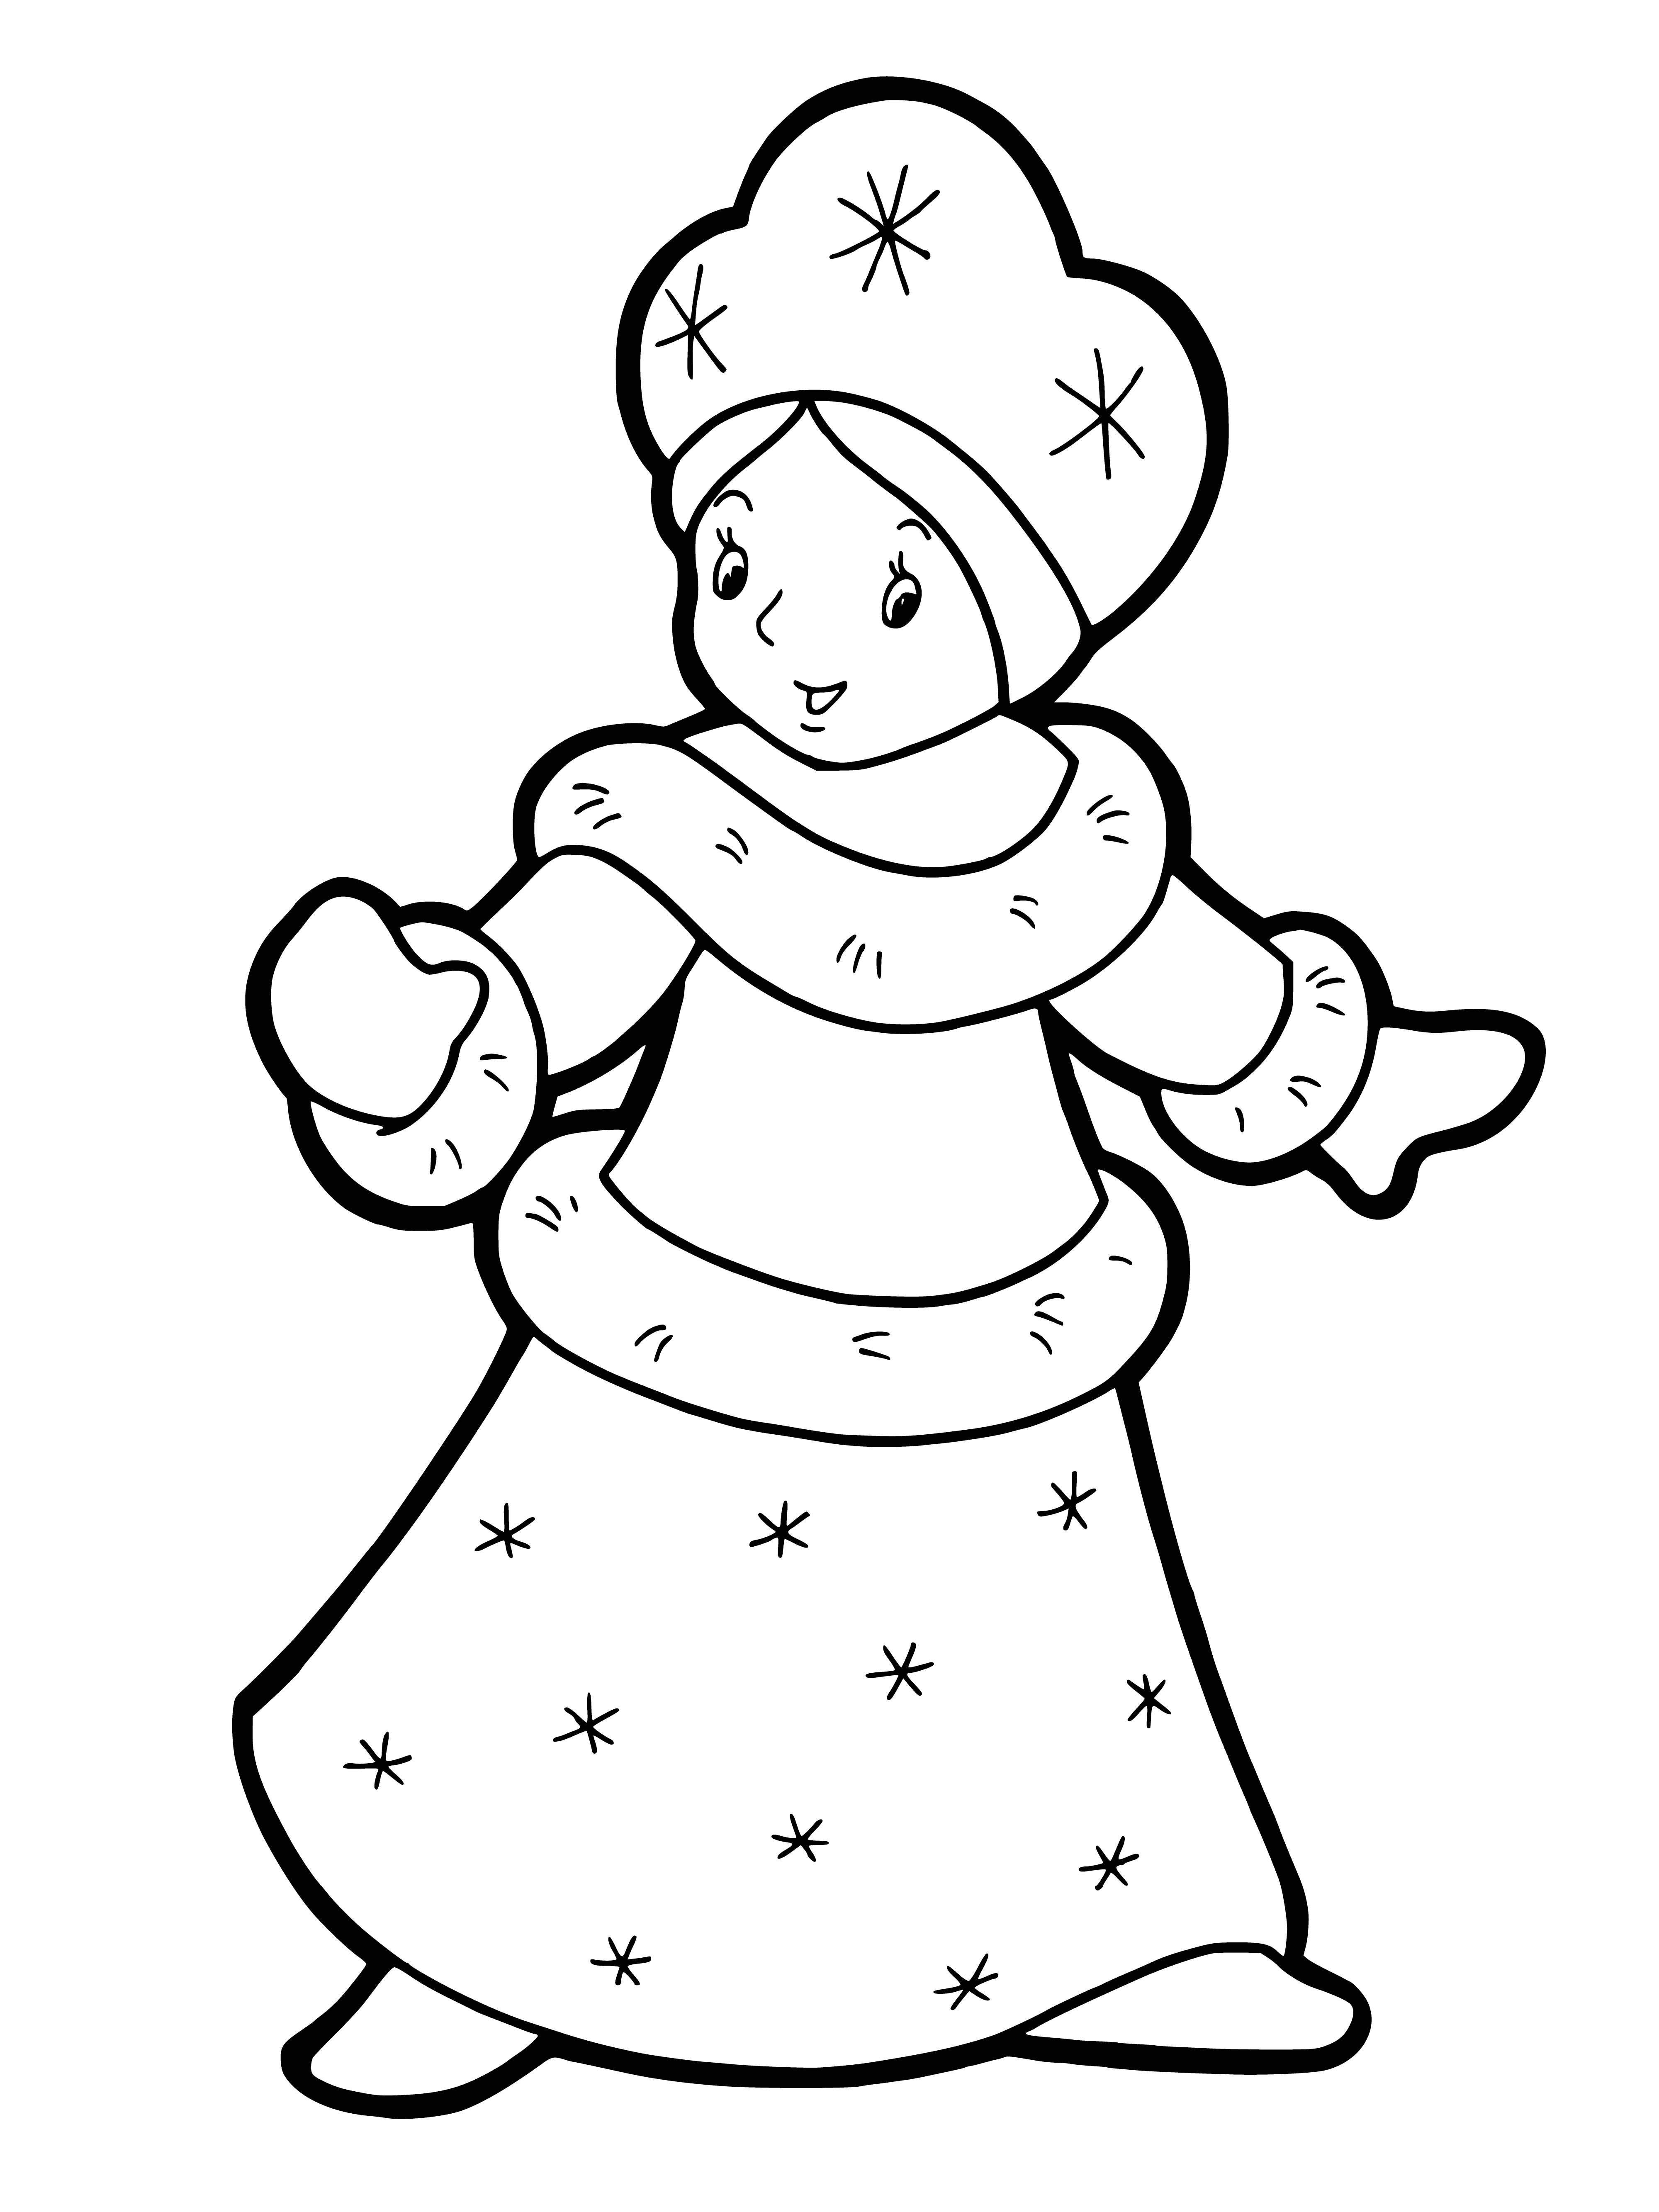 coloring page: Snow Maiden stands in snowy scene, white dress & scarf, long white hair with blue flowers. Arms outstretched in front of large tree.